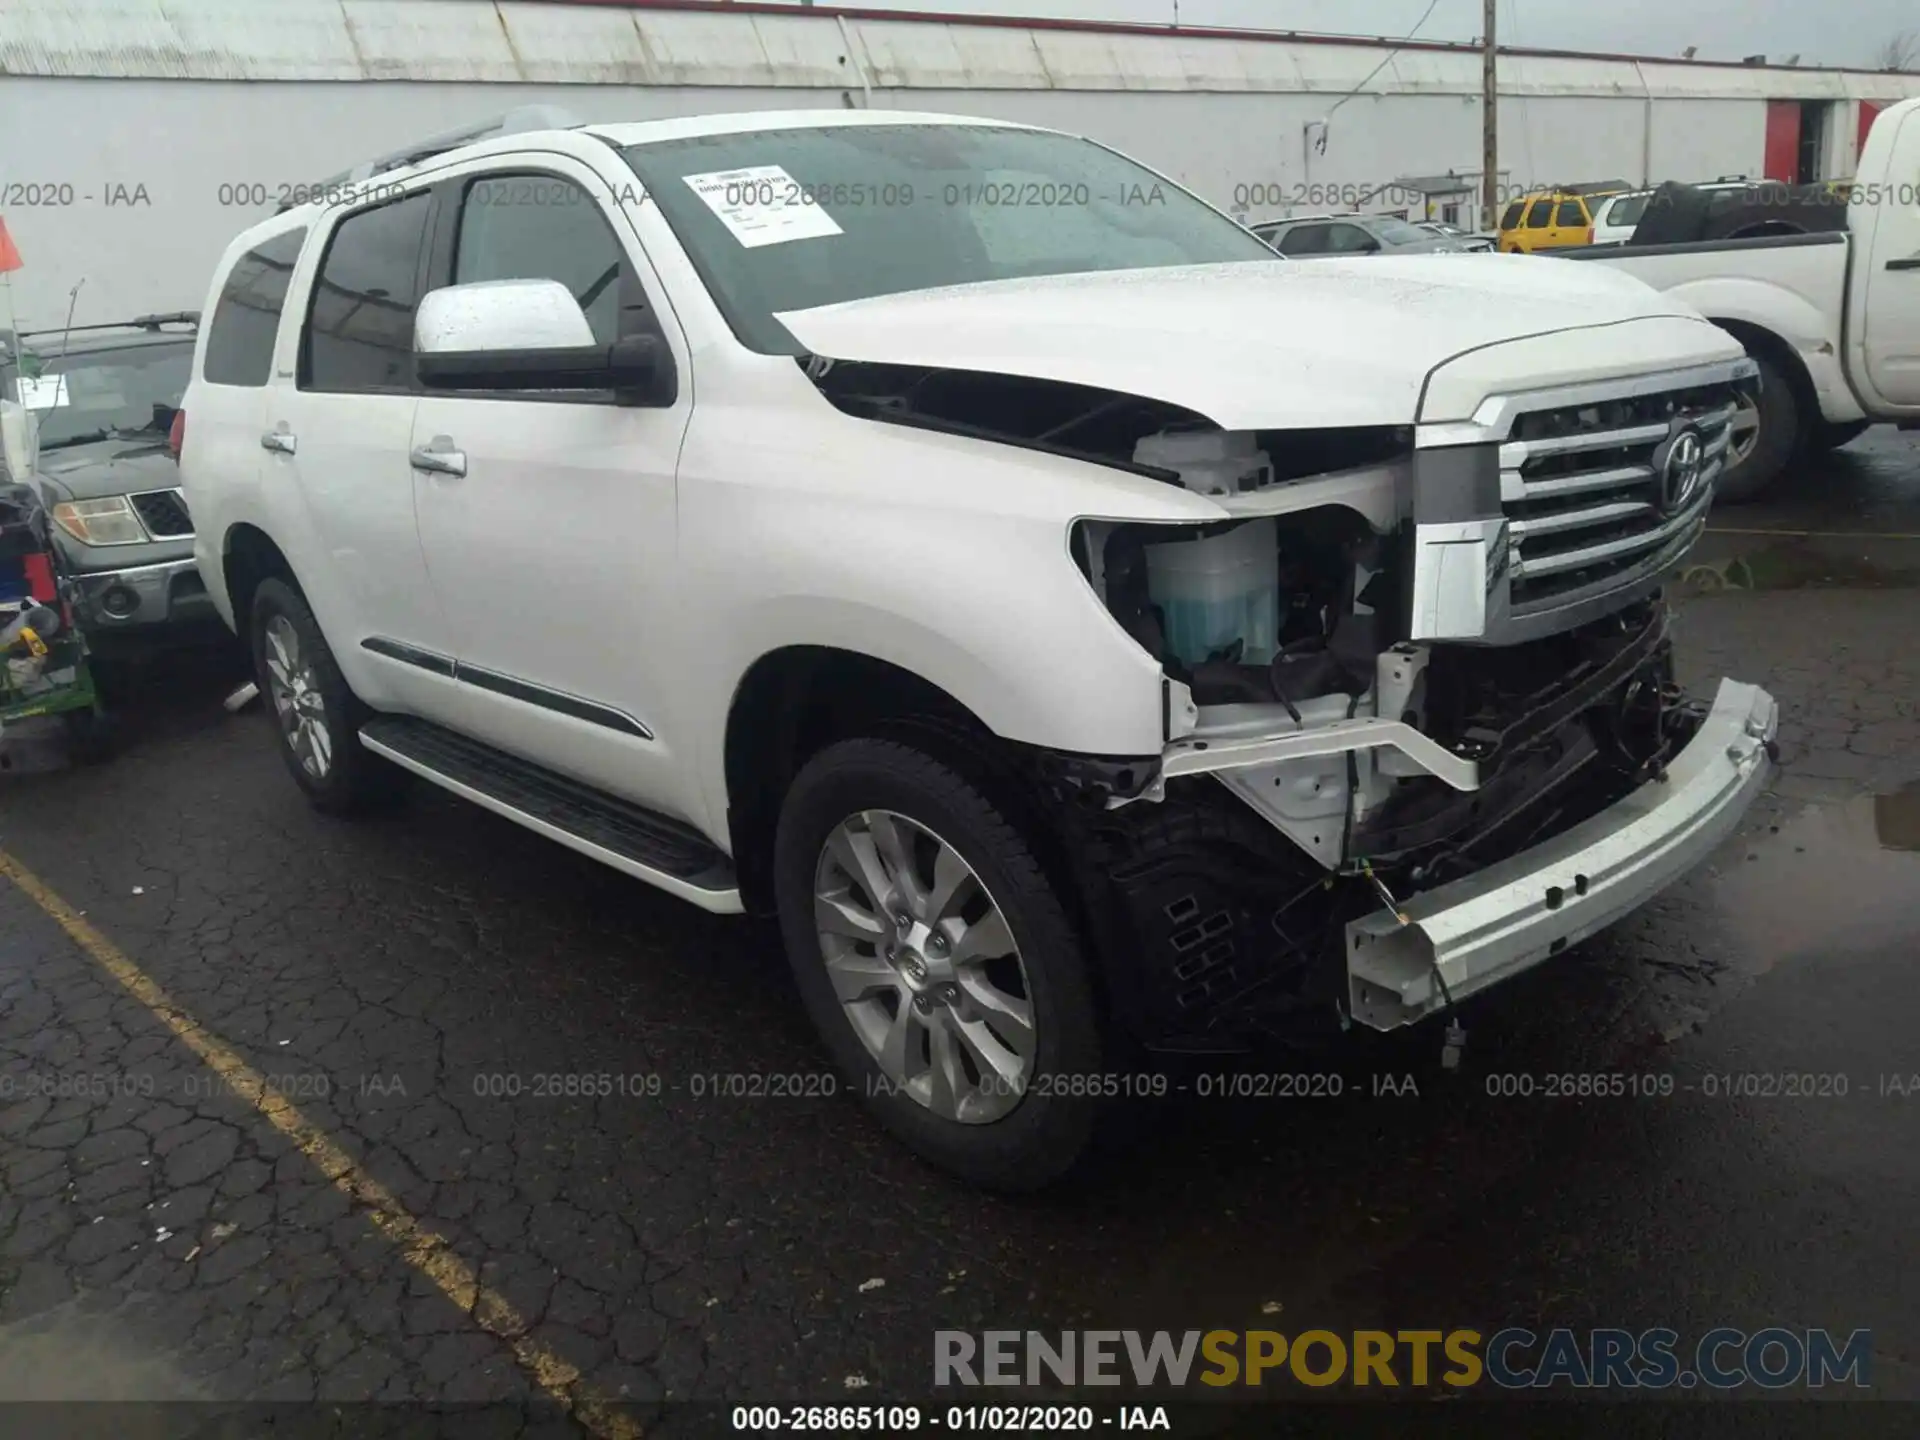 1 Photograph of a damaged car 5TDDY5G14KS173316 TOYOTA SEQUOIA 2019